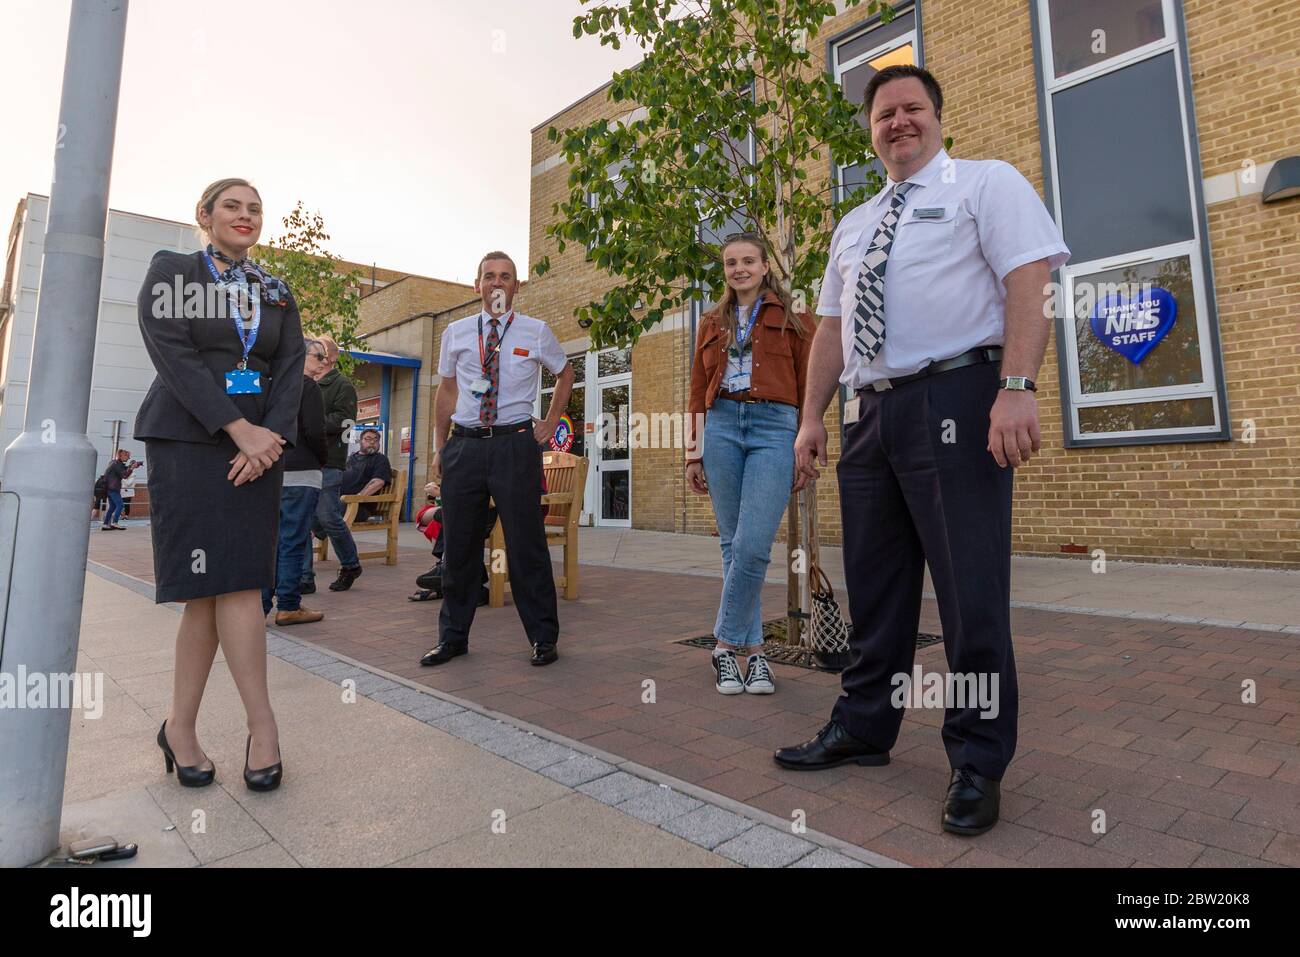 Furloughed airline staff outside Southend University Hospital, Essex, UK. Crew volunteering at hospital. British Airways and easyJet employees Stock Photo